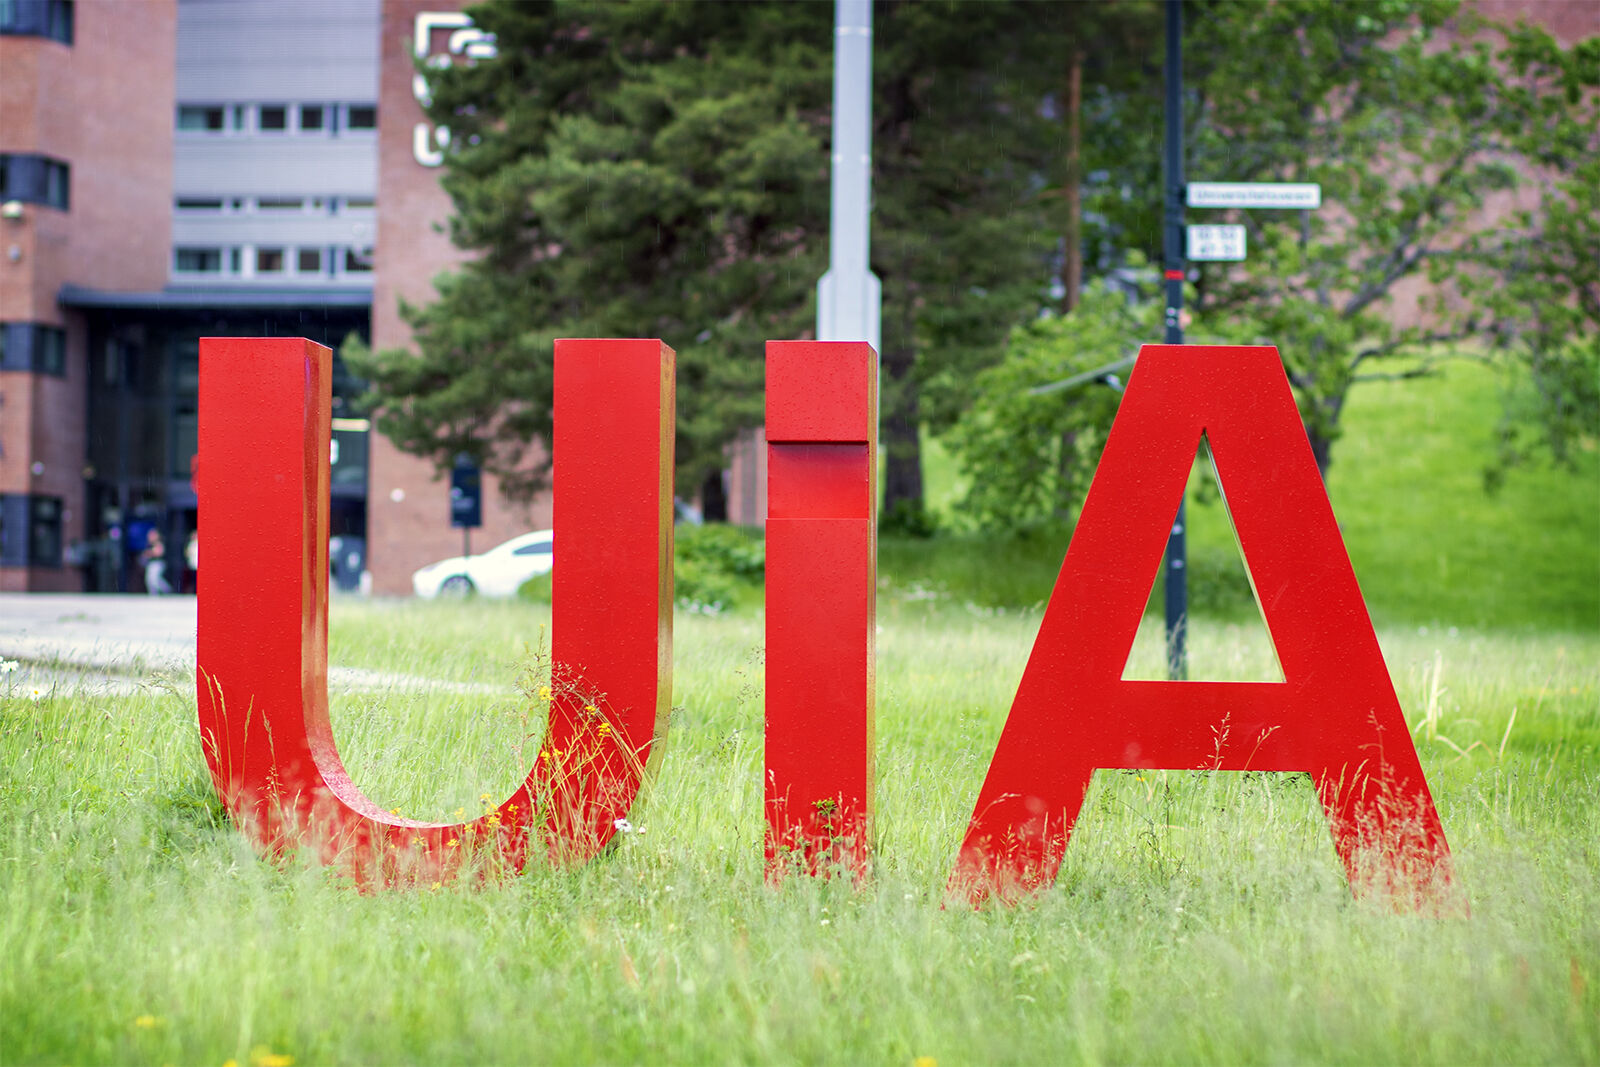 The photo depicts the red letters spelling UiA's logo placed on a lawn with tall grass.